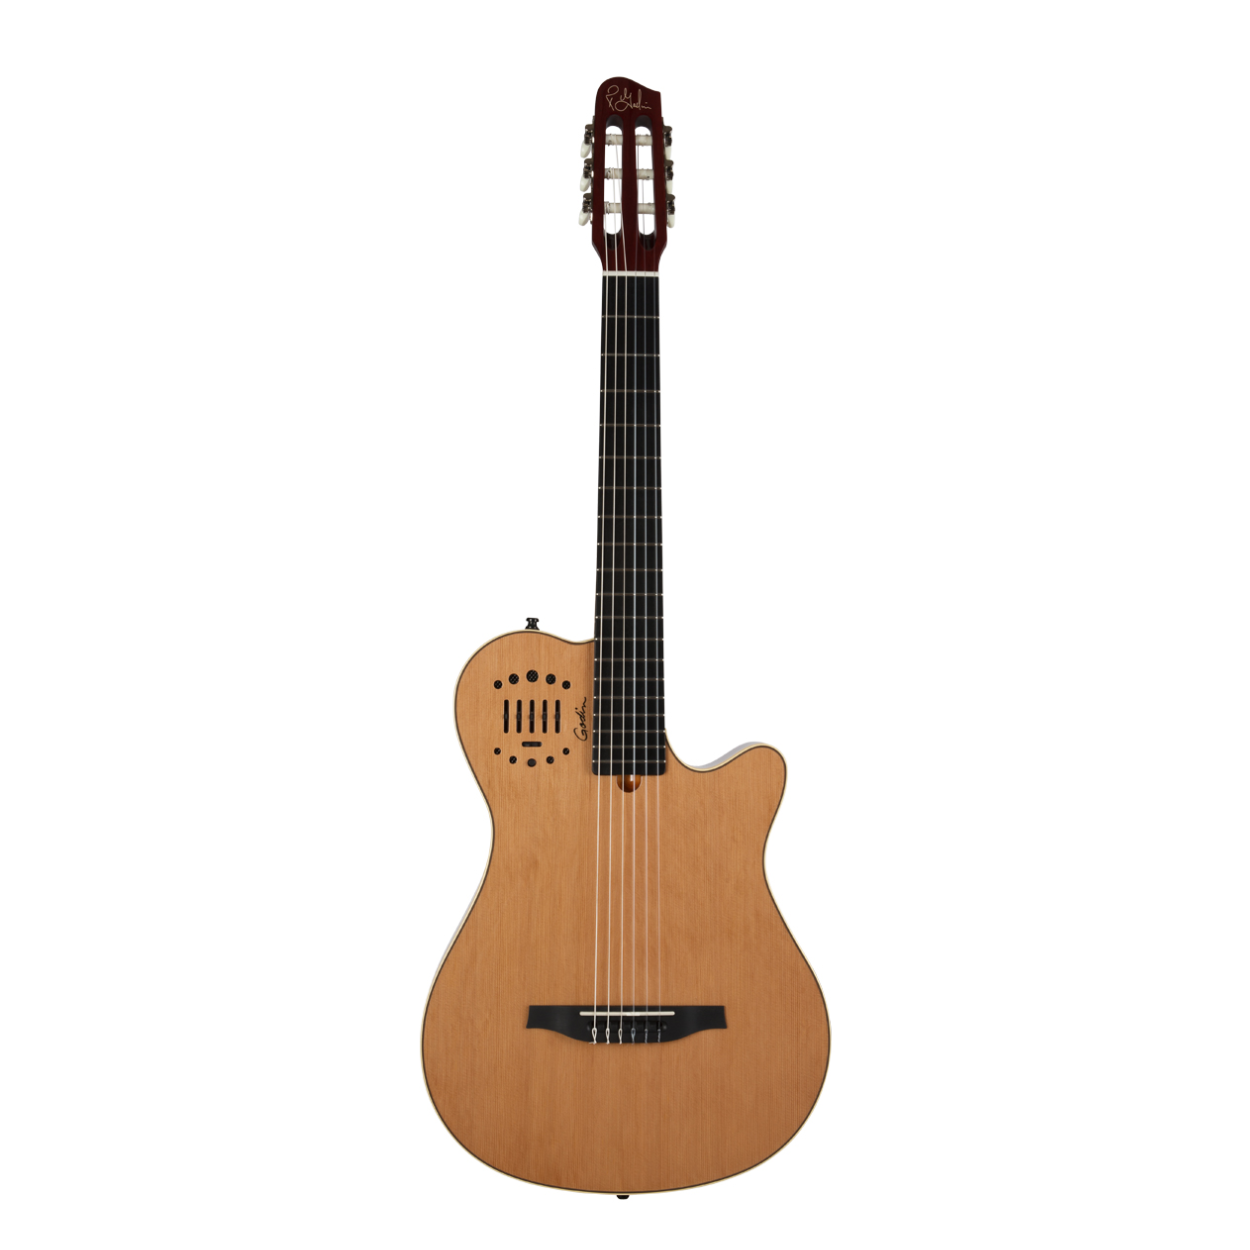 GODIN MULTIAC GRAND CONCERT DUET AMBIANCE NATURAL HG ELECTRIC CLASSICAL GUITAR WITH GIGBAG